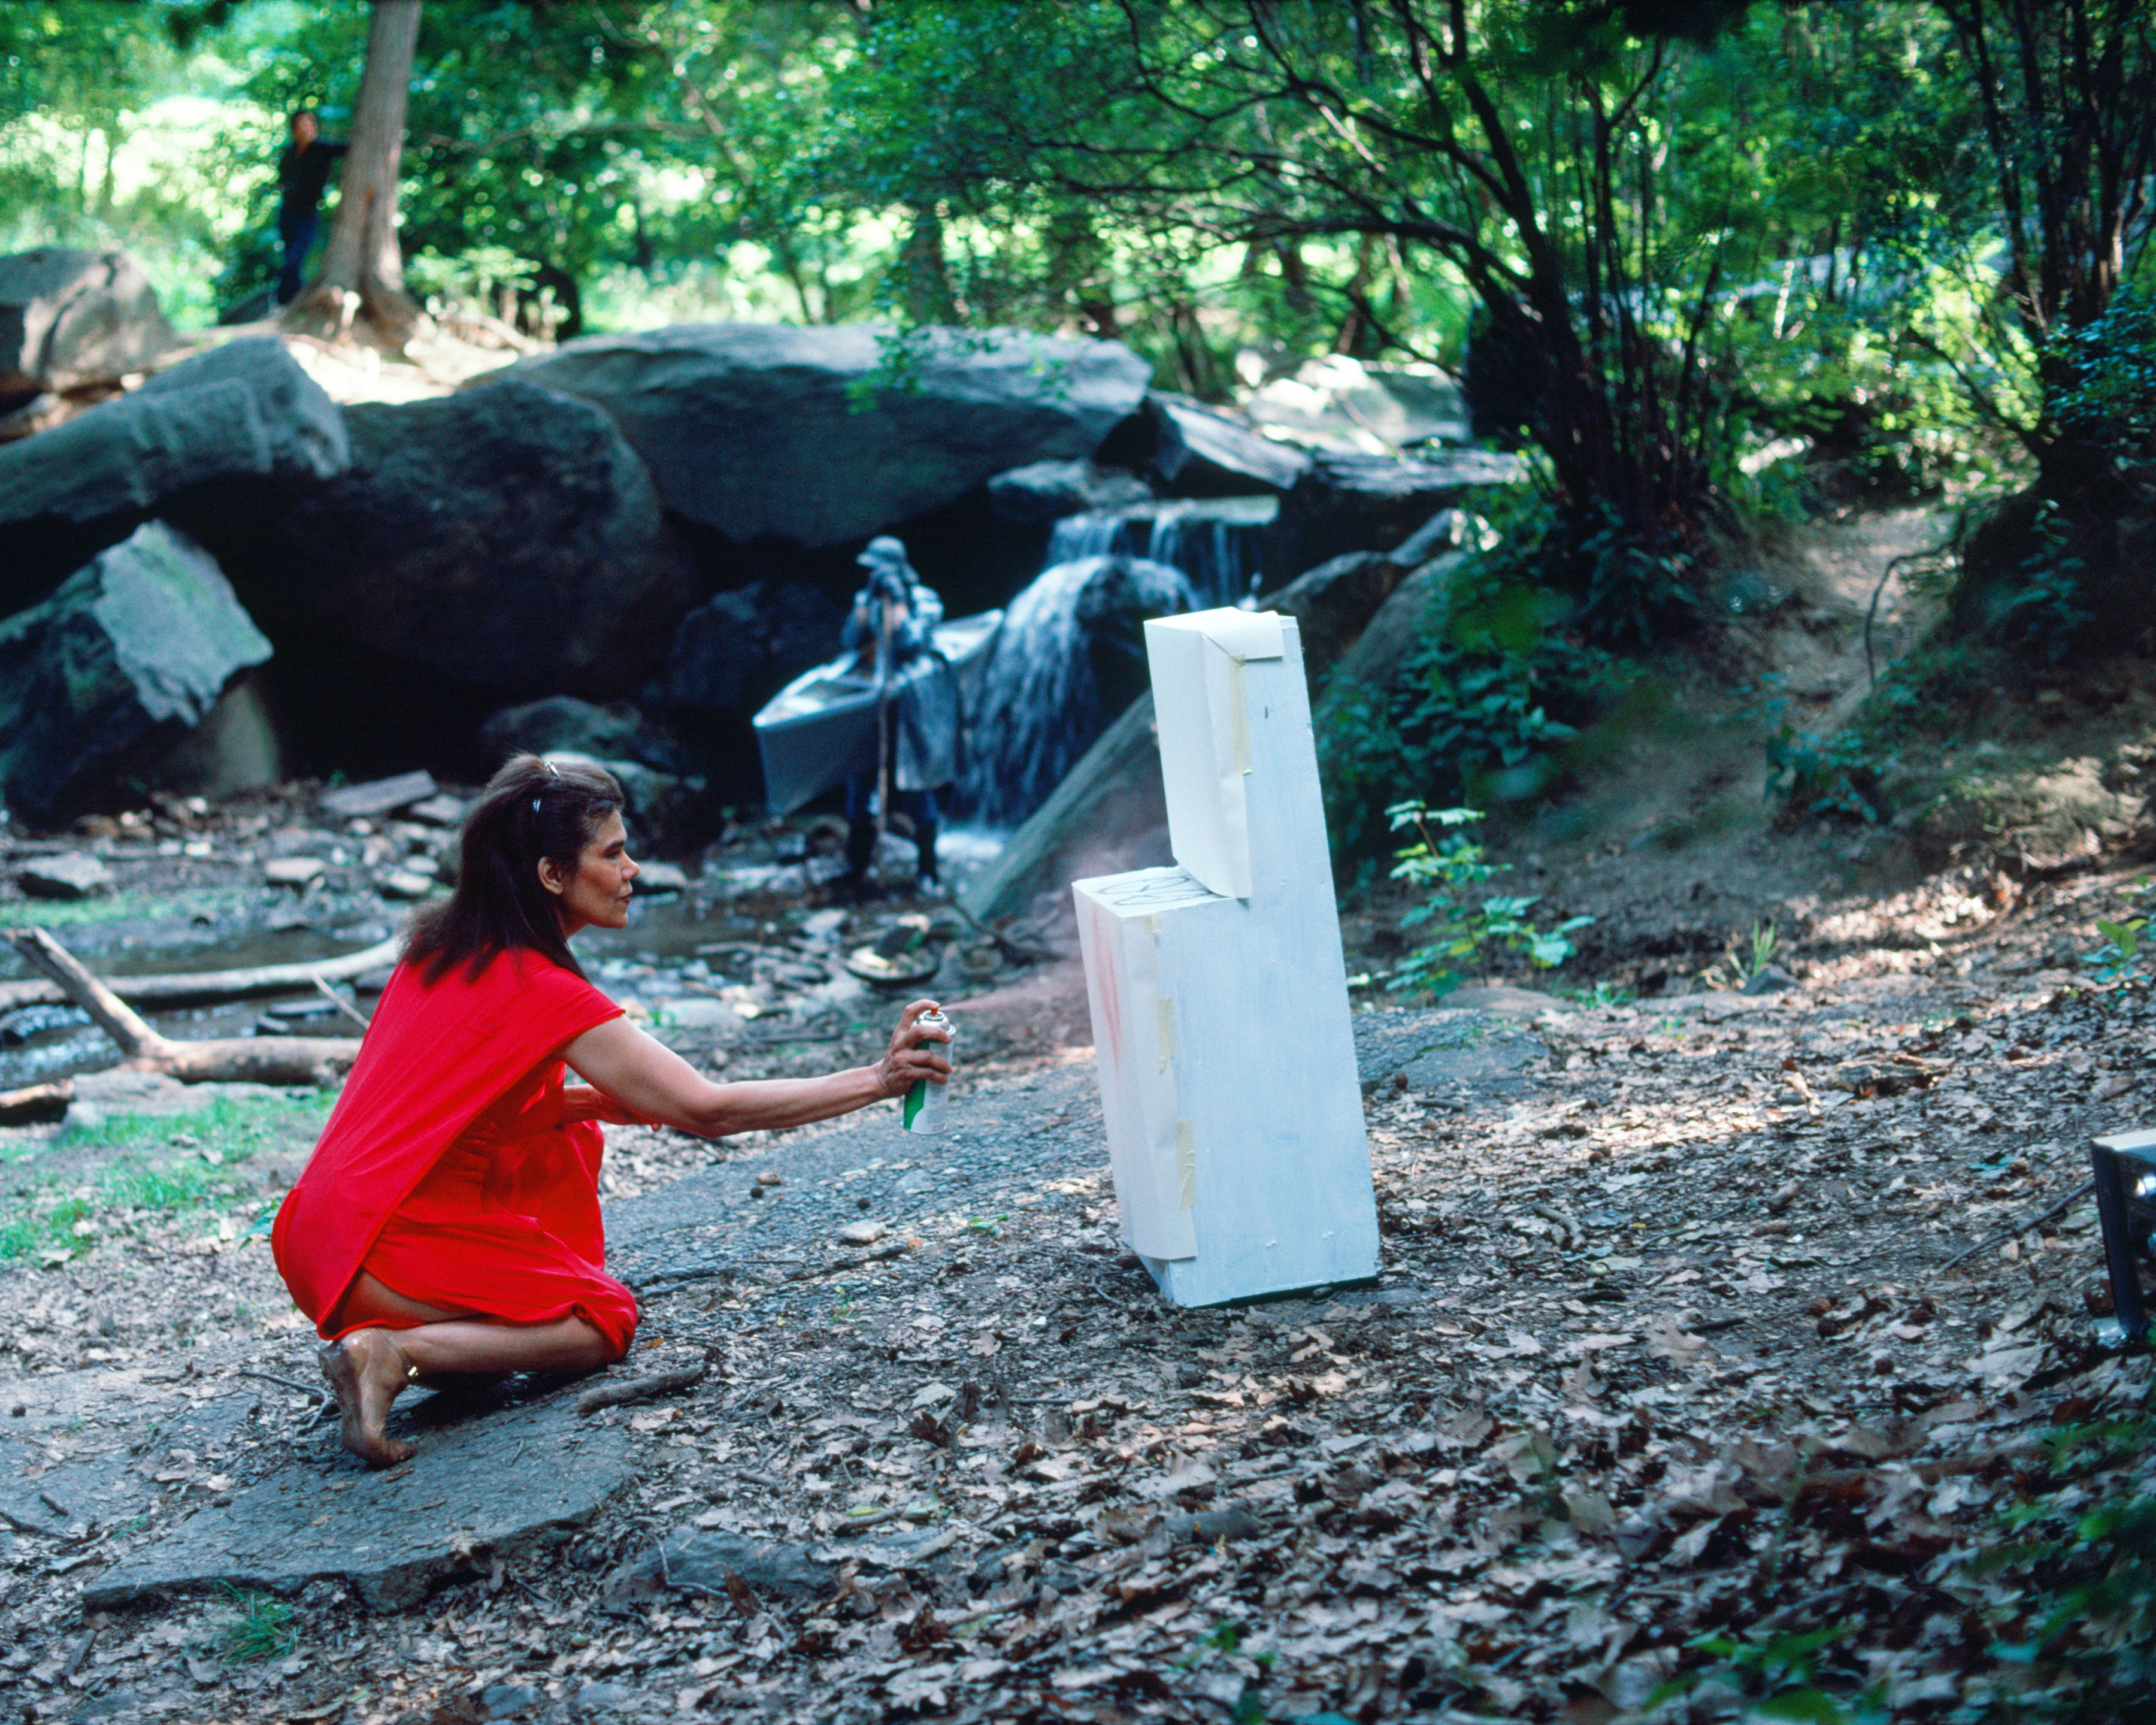 Rivers, First Draft: The Woman in Red starts painting the stove her own color, 1982/2015, Digital C-print from Kodachrome 35mm slides in 48 parts, 16h x 20w in (40.64h x 50.80w cm)